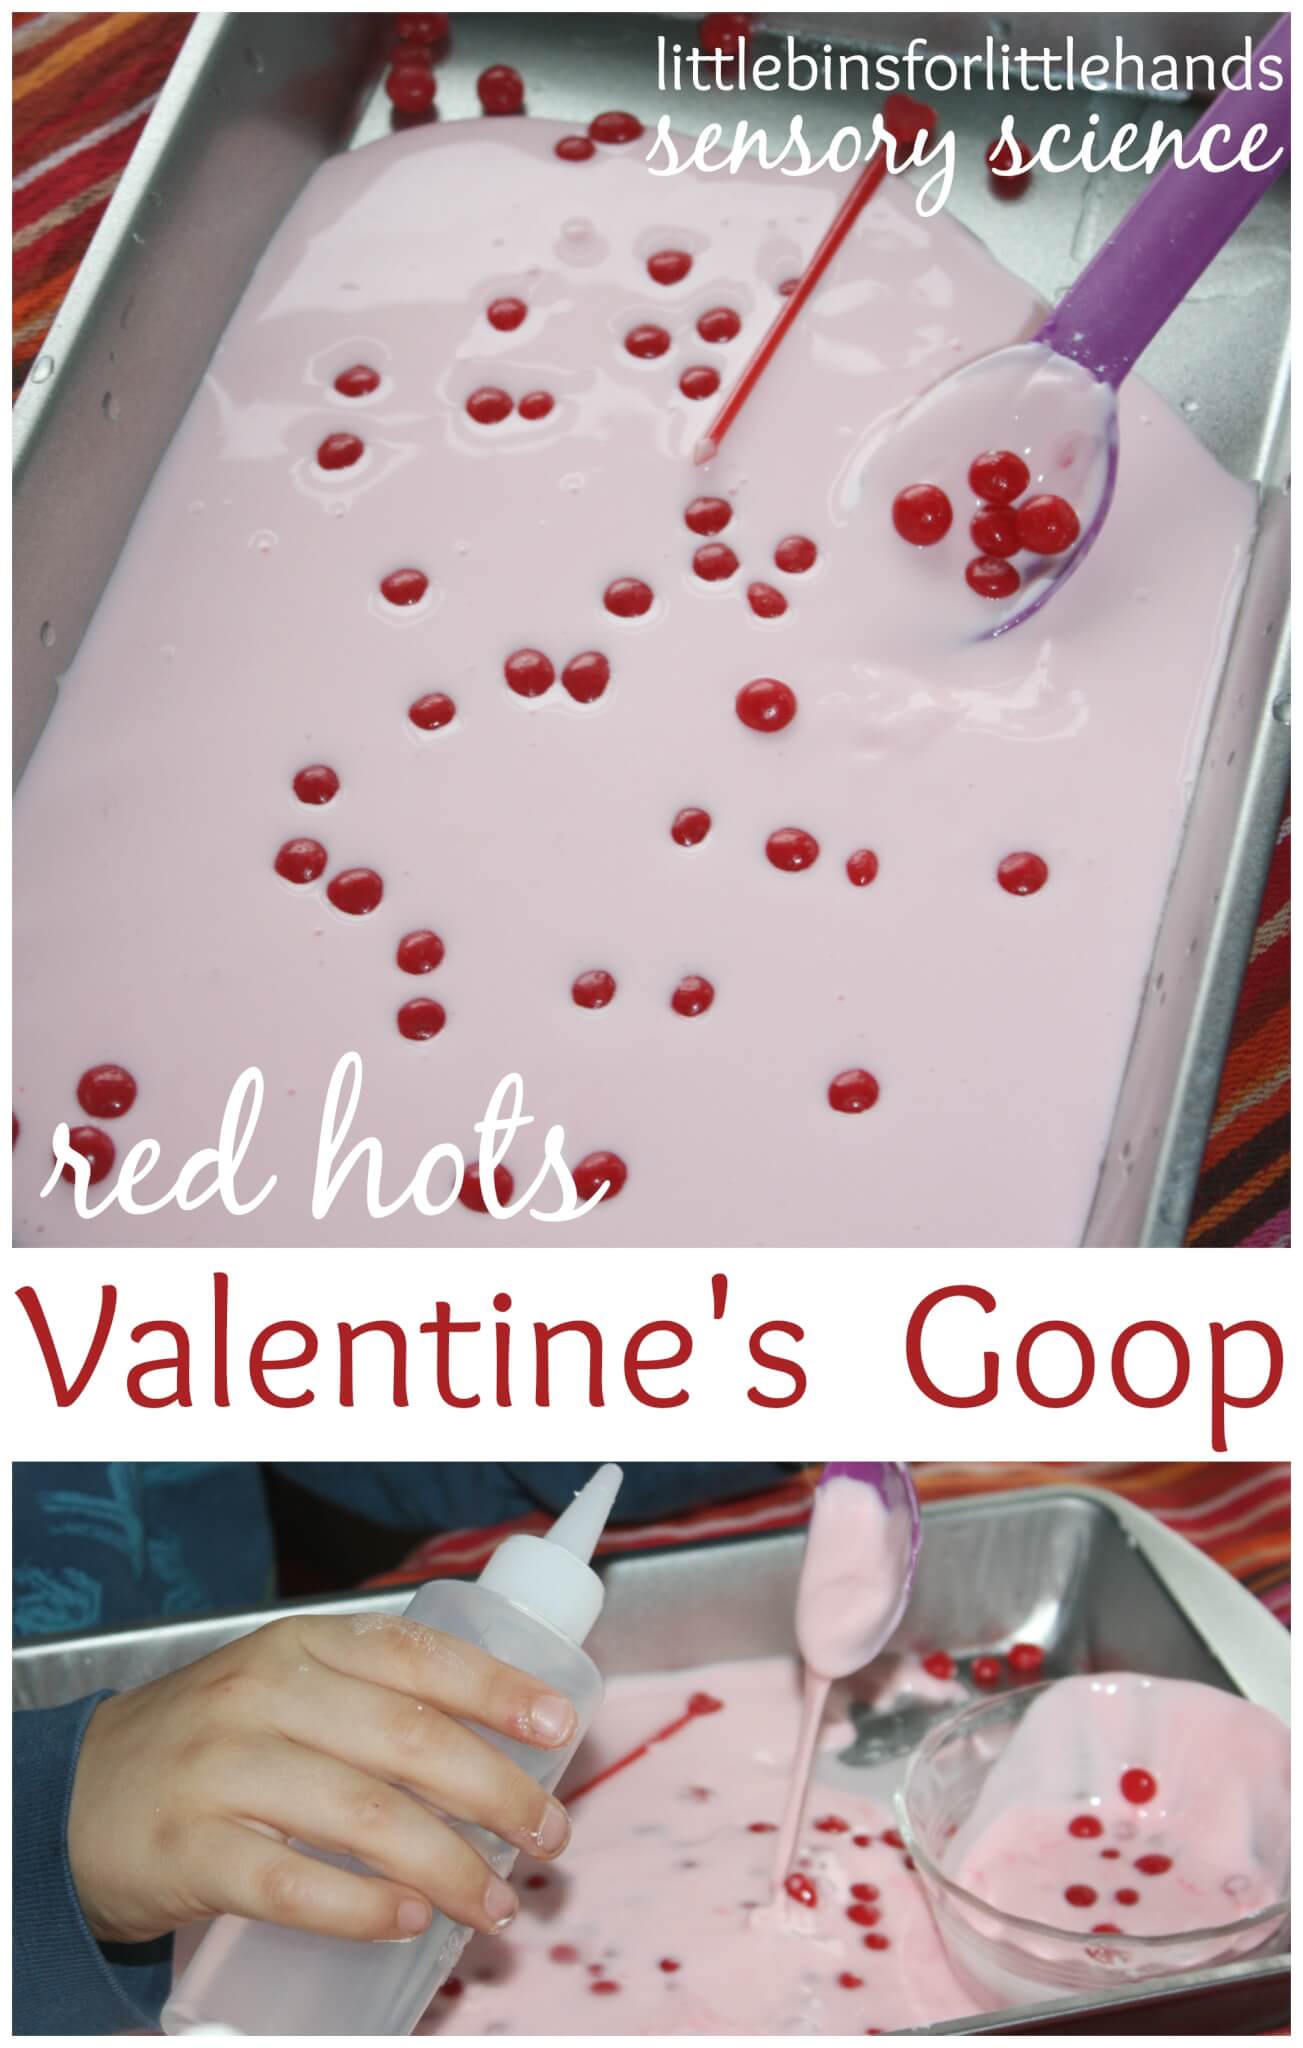 Valentines Day Learning Activities and Science Experiments for Kids